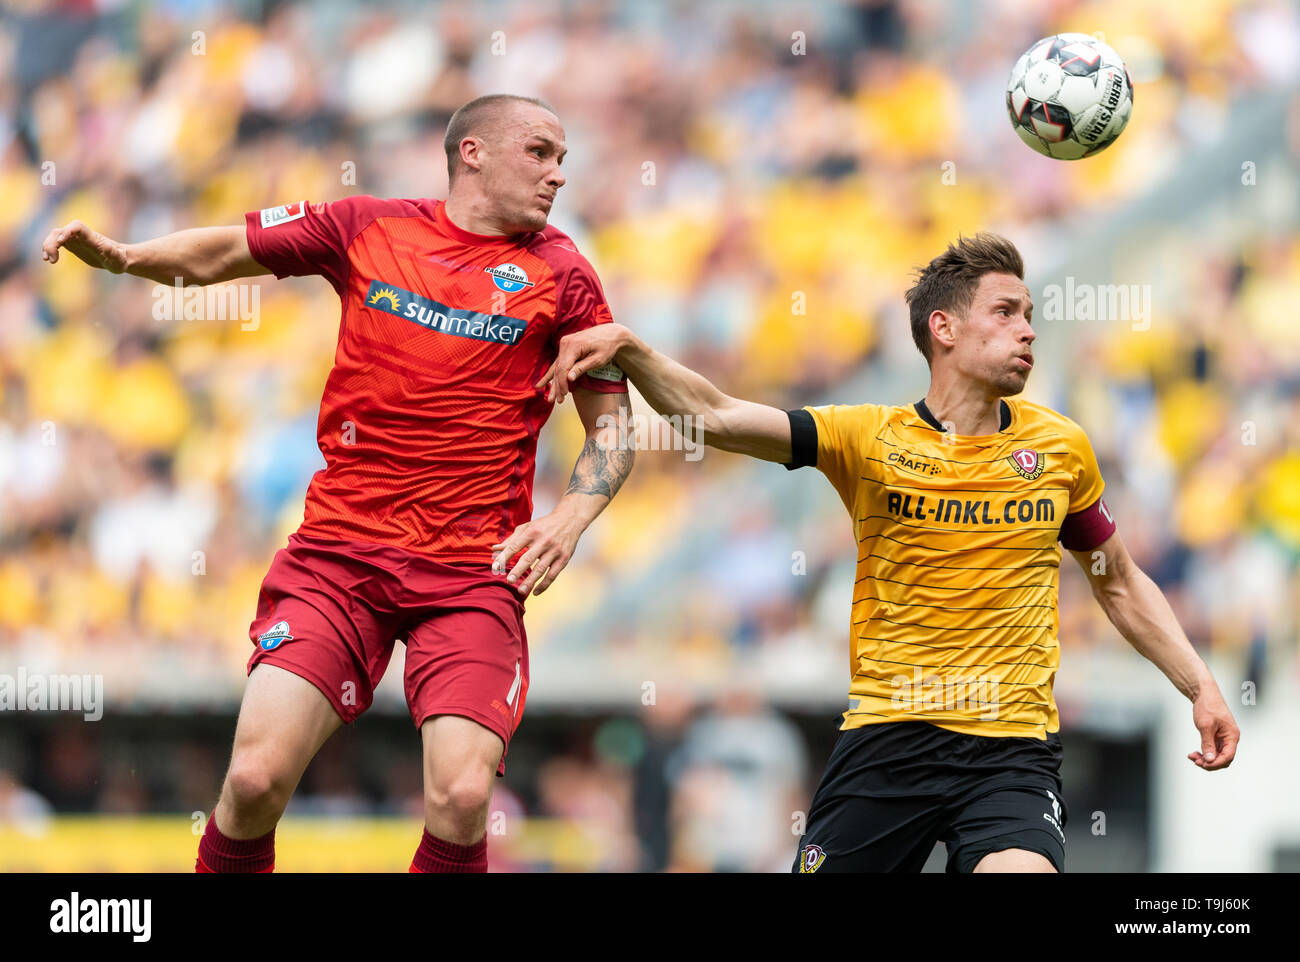 Dresden, Germany. 19th May, 2019. Soccer: 2nd Bundesliga, Dynamo Dresden - SC Paderborn 07, 34th matchday, in the Rudolf Harbig Stadium. Paderborn's Sven Michel (l) against Dynamos Jannik Müller. Credit: Robert Michael/dpa-Zentralbild/dpa - IMPORTANT NOTE: It is prohibited to use or have used photographs taken in the stadium and/or the match in the form of sequence images and/or video-like photo sequences./dpa/Alamy Live News Credit: dpa picture alliance/Alamy Live News Stock Photo